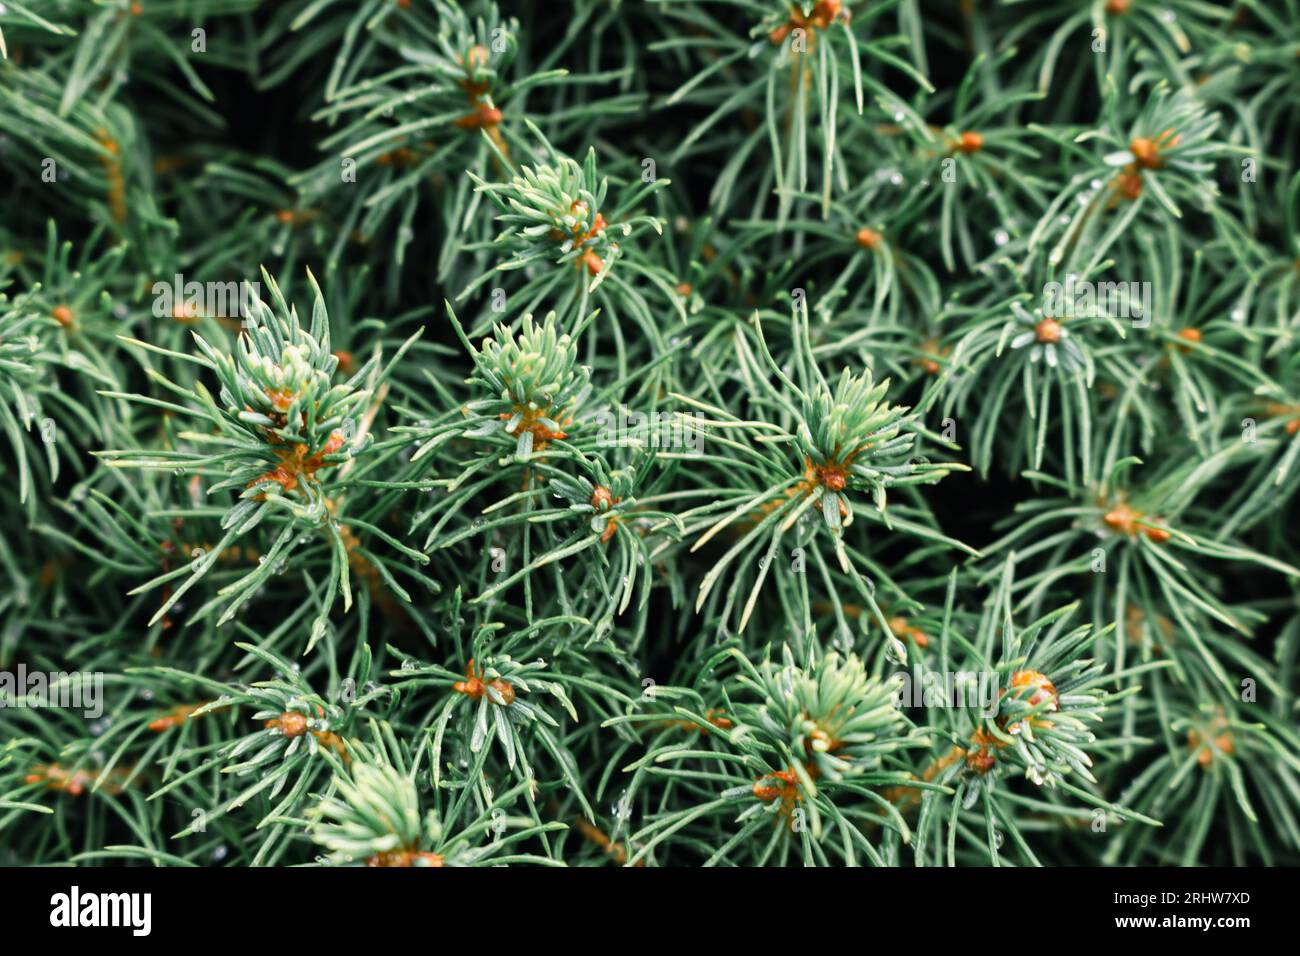 Coniferous trees, close up. Evergreen tree. Pine needles, macro. Spruce needles. Natural pattern. Christmas tree. Chlorophyl leaves. Pine forest. Stock Photo